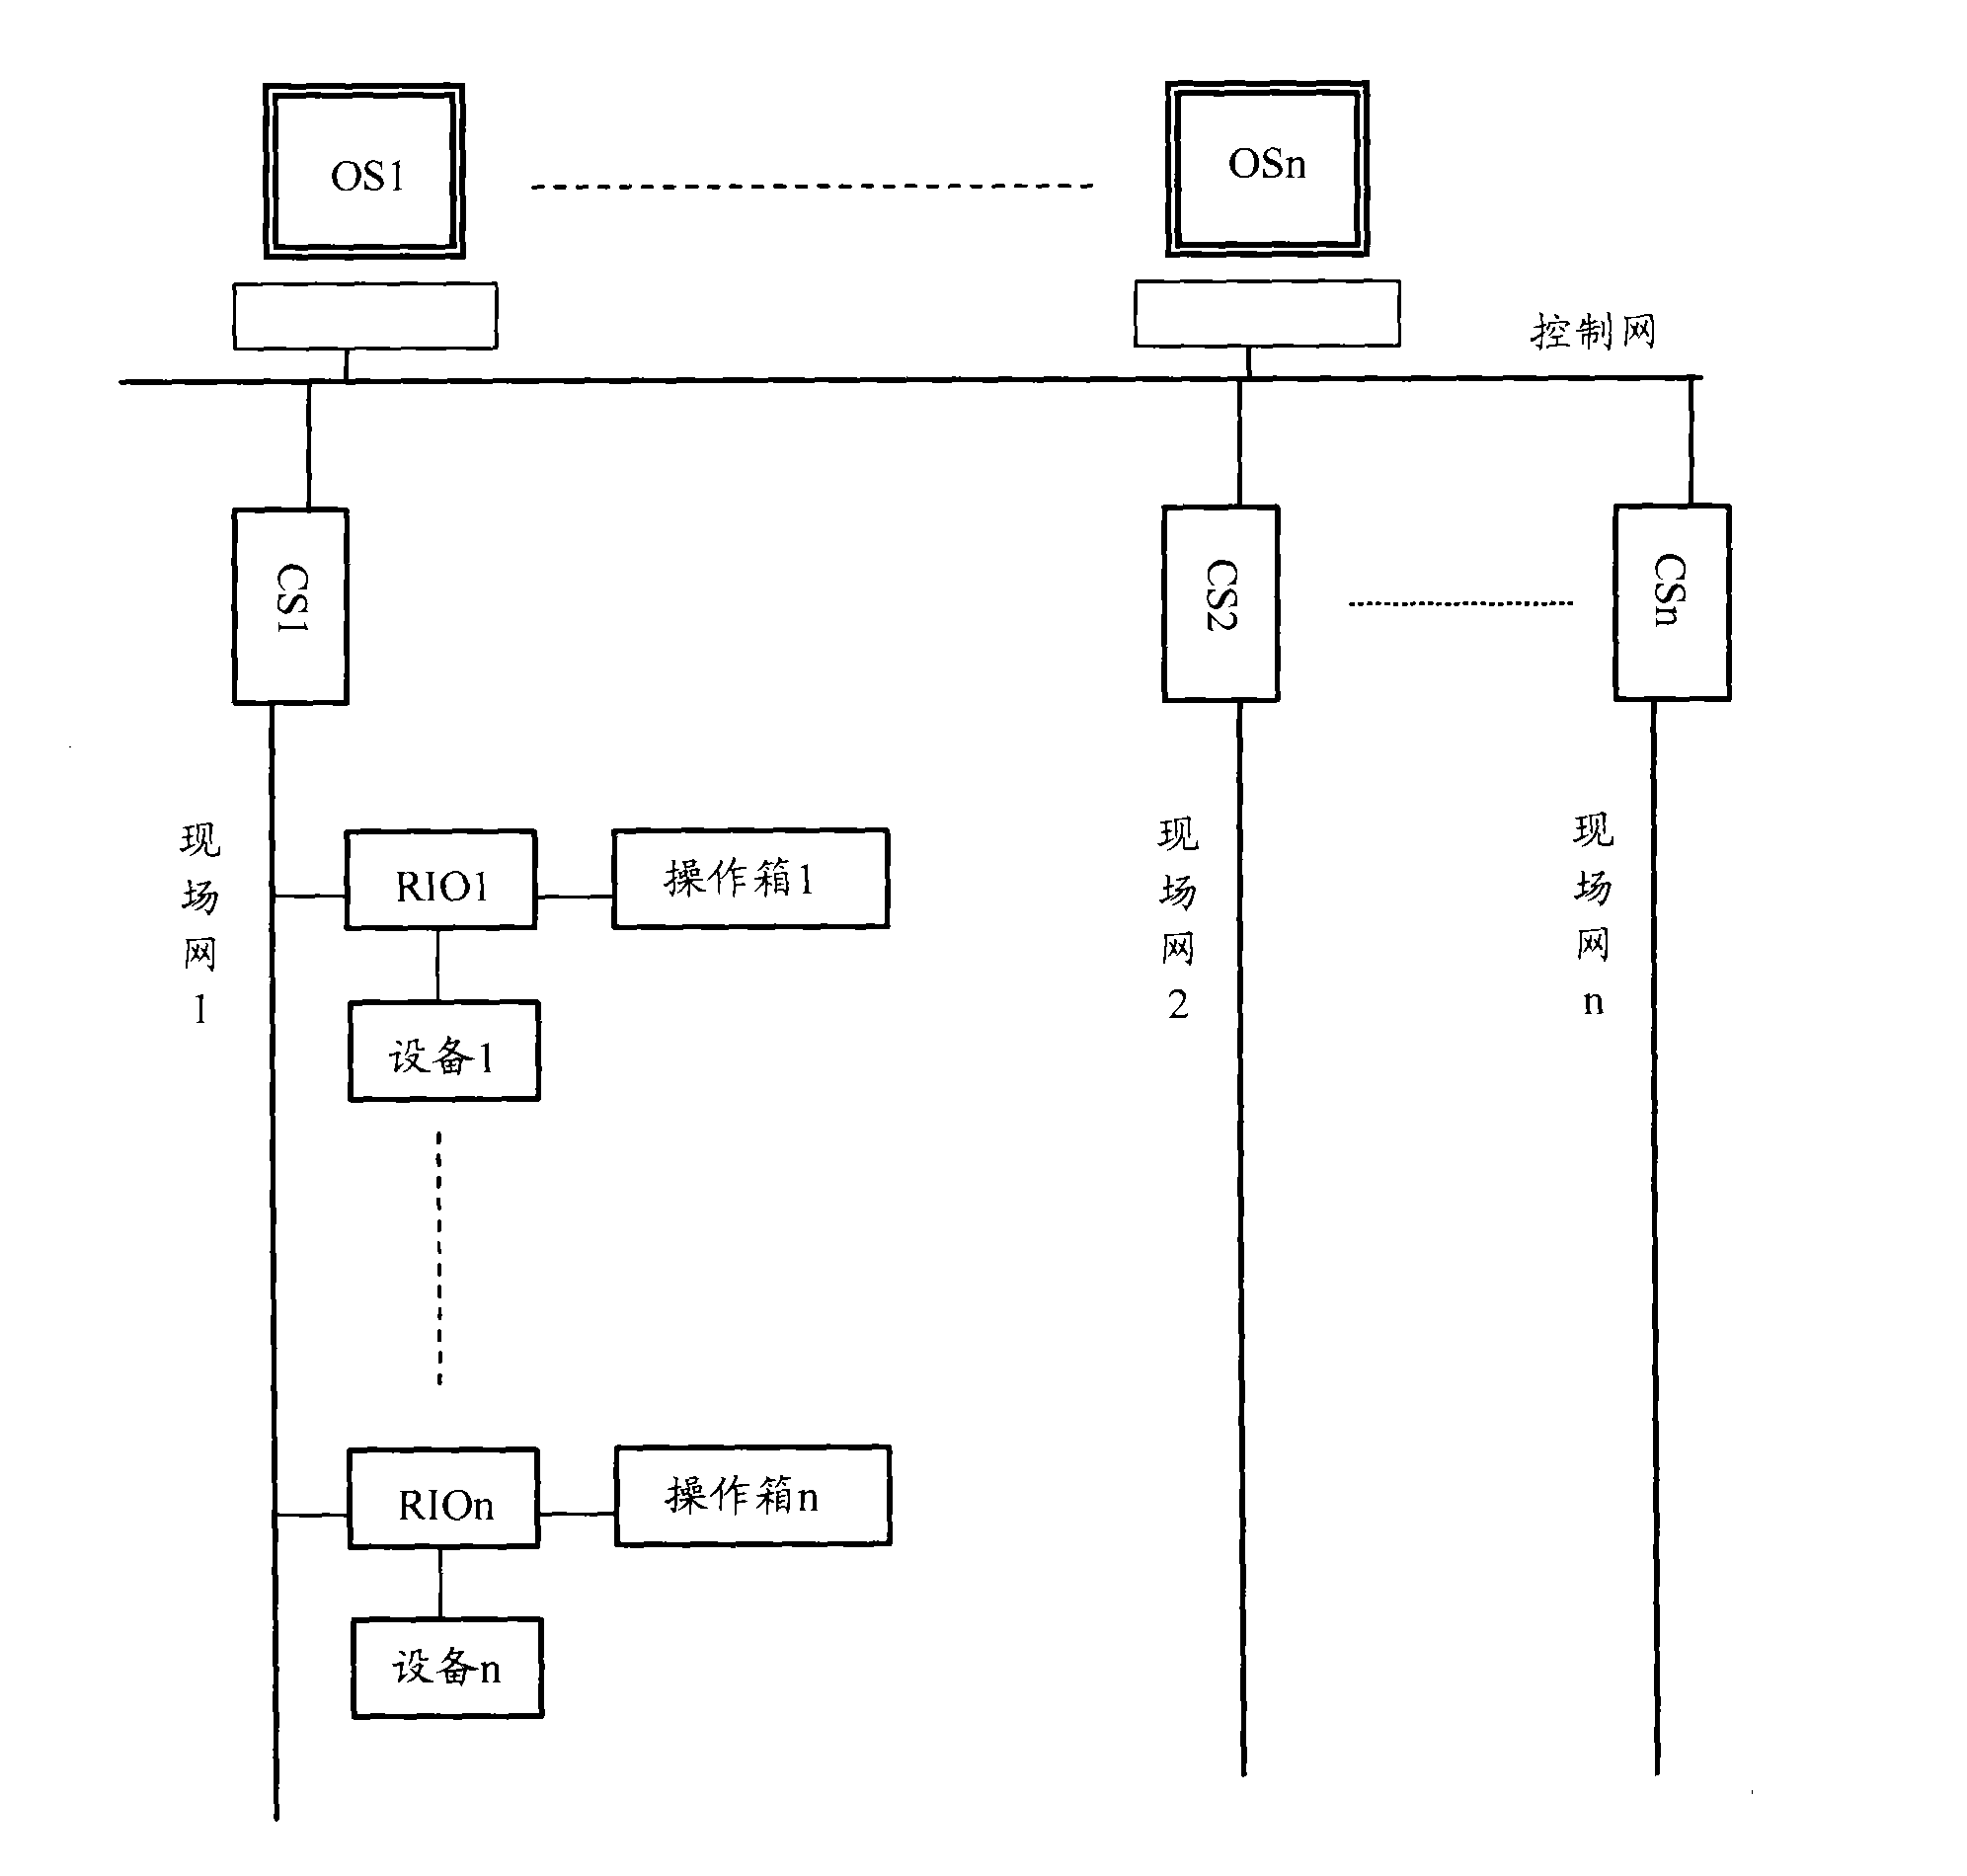 Control system of sintering plant